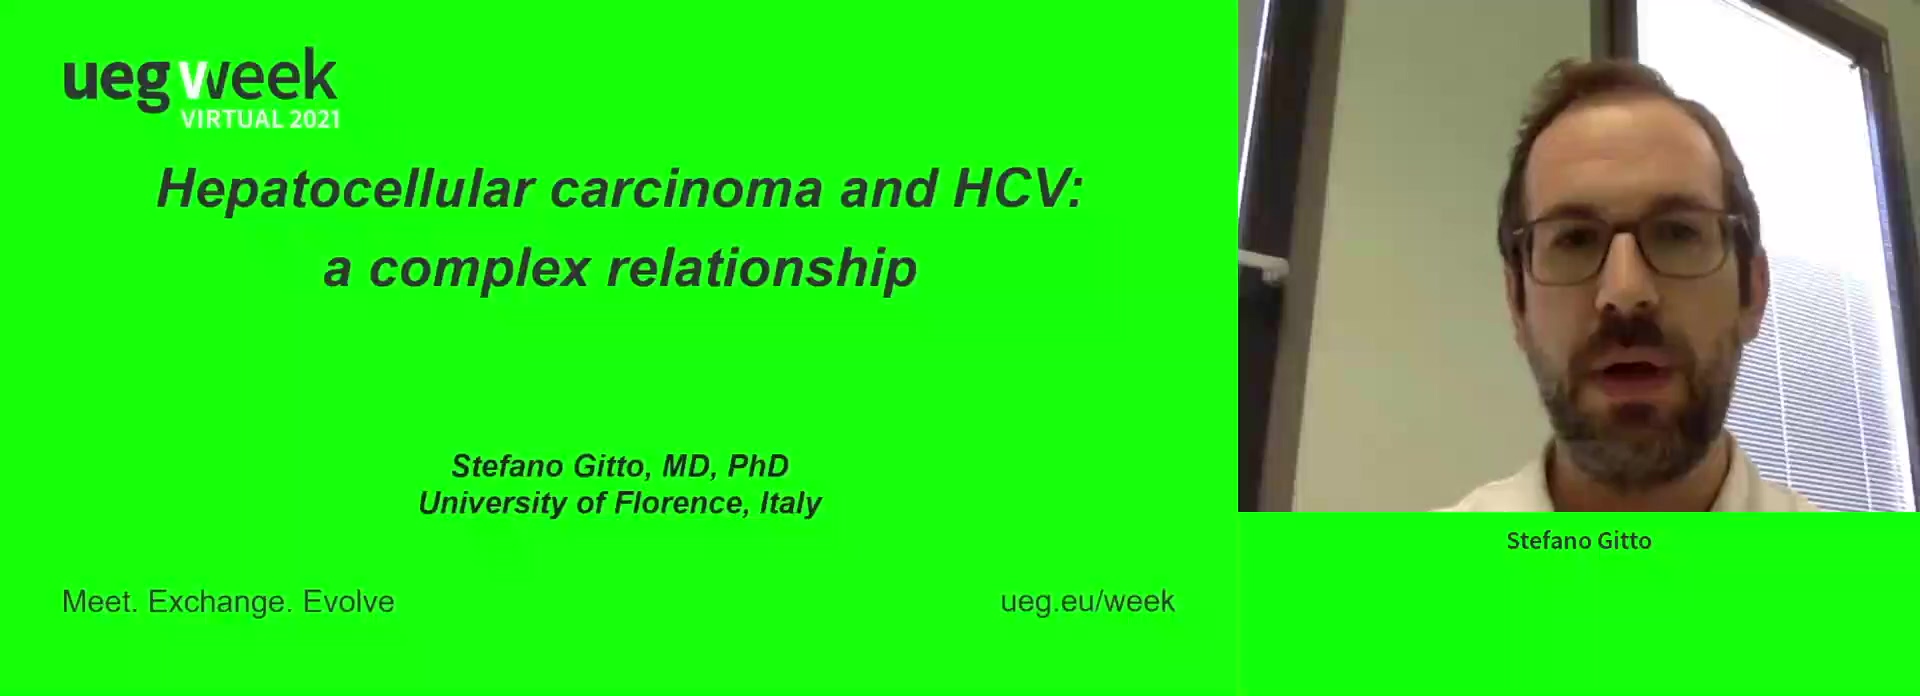 Hepatocellular carcinoma and HCV: A complex relationship